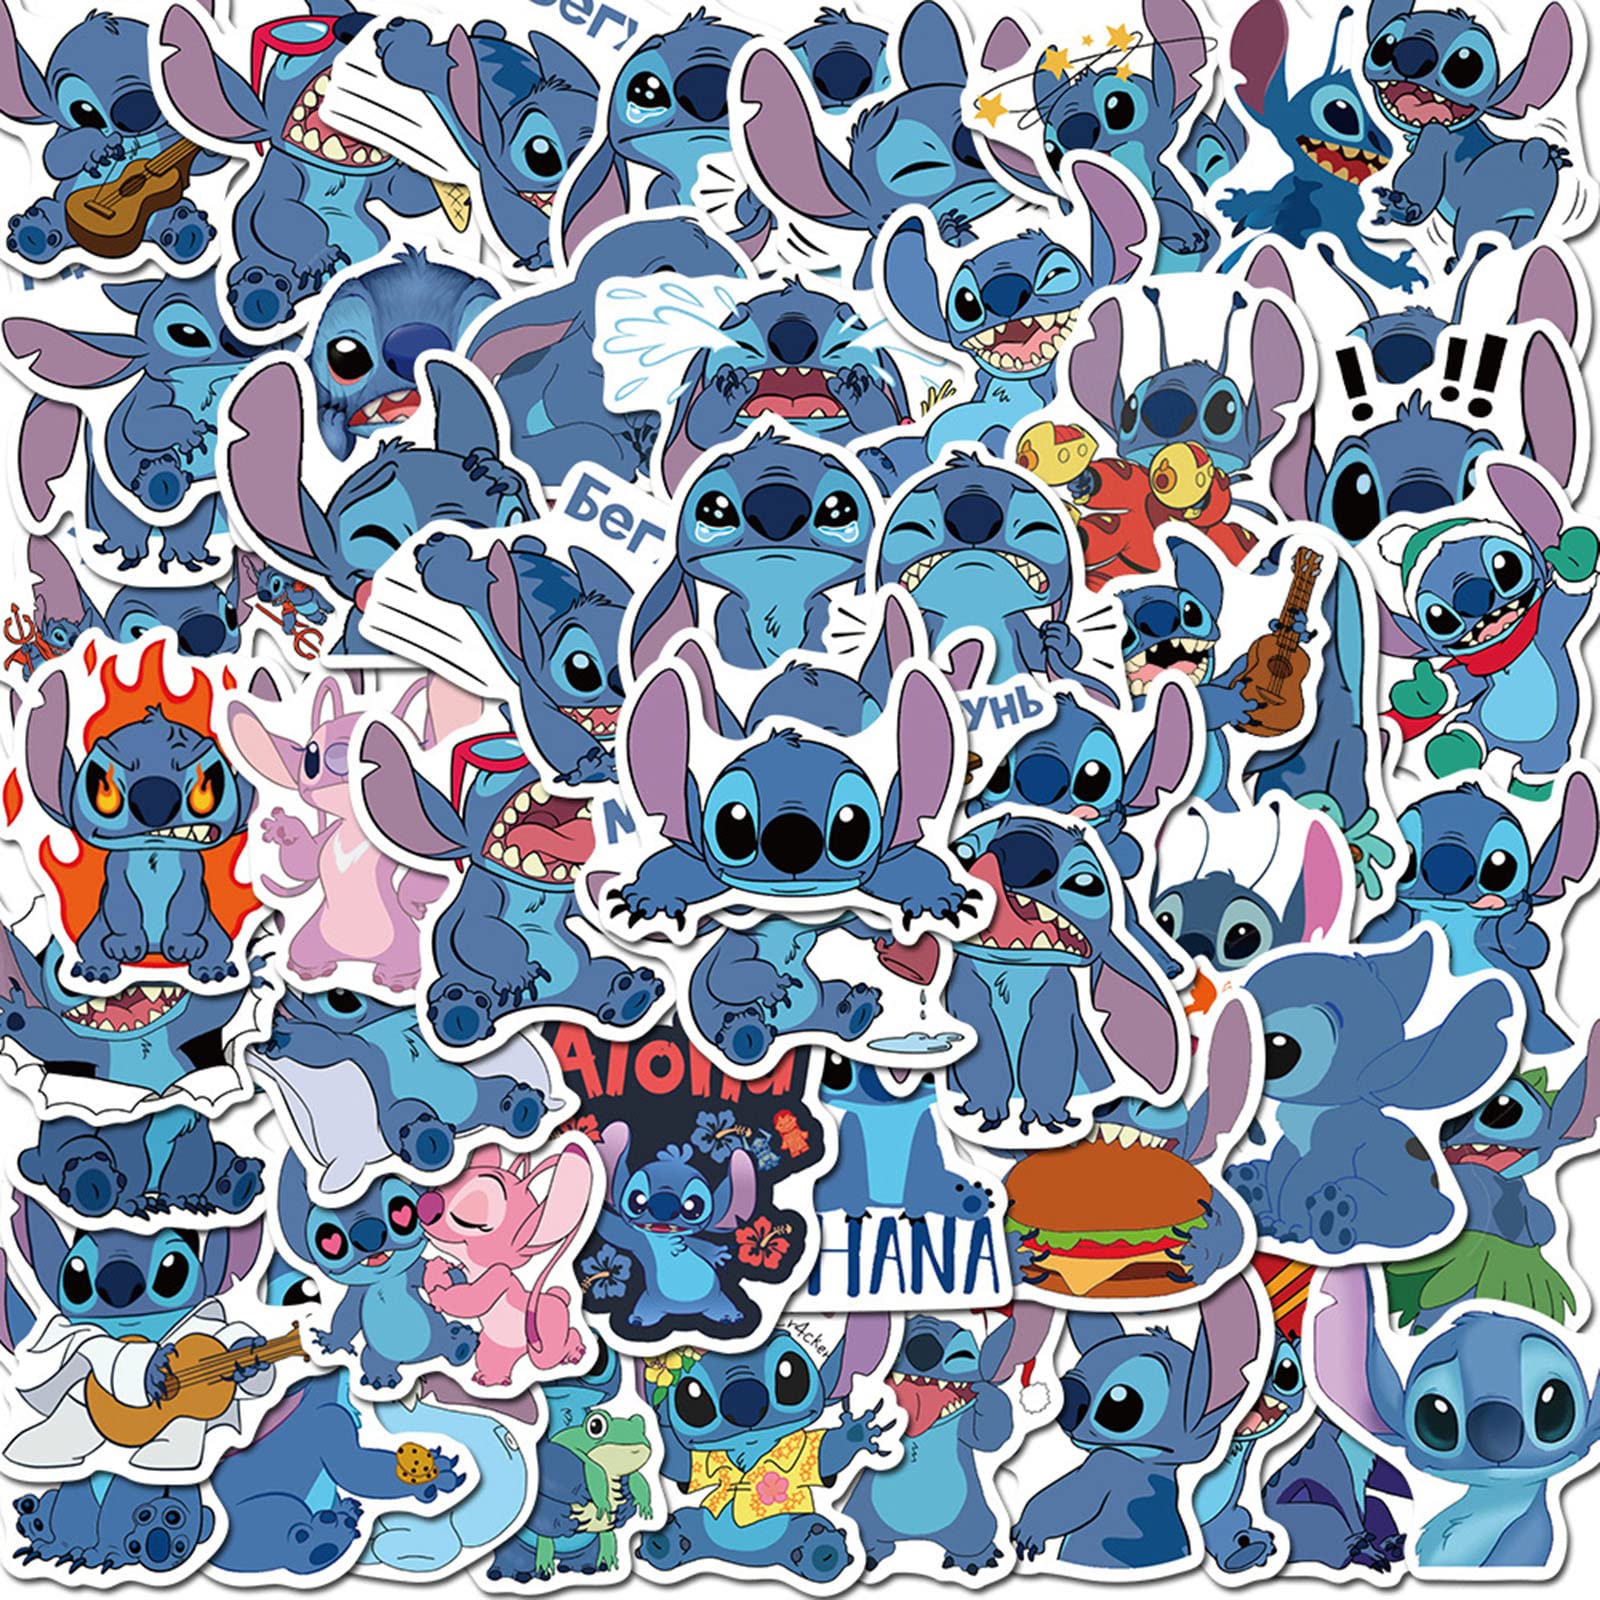 Meet Holiday Cute Stitch Decoration Stickers Waterproof Vinyl Scrapbook Stickers Car Motorcycle Bicycle Luggage Decal 50 PCS Laptop Stickers (Lilo & Stitch)